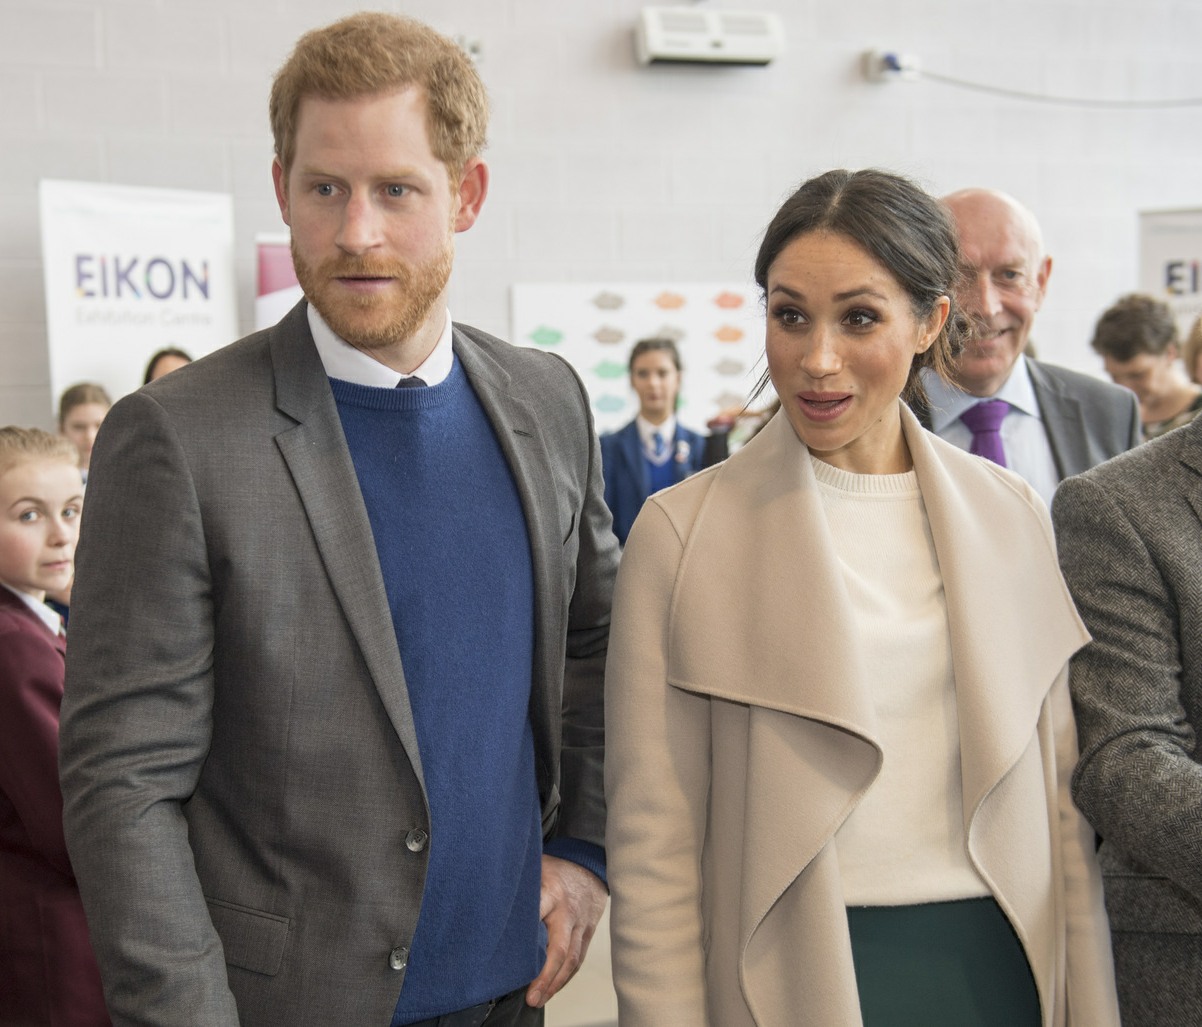 Prince Harry and Meghan Markle visit the Eikon Centre in Lisburn, Northern Ireland, to attend an event to mark the second year of youth-led peace-building initiative Amazing the Space